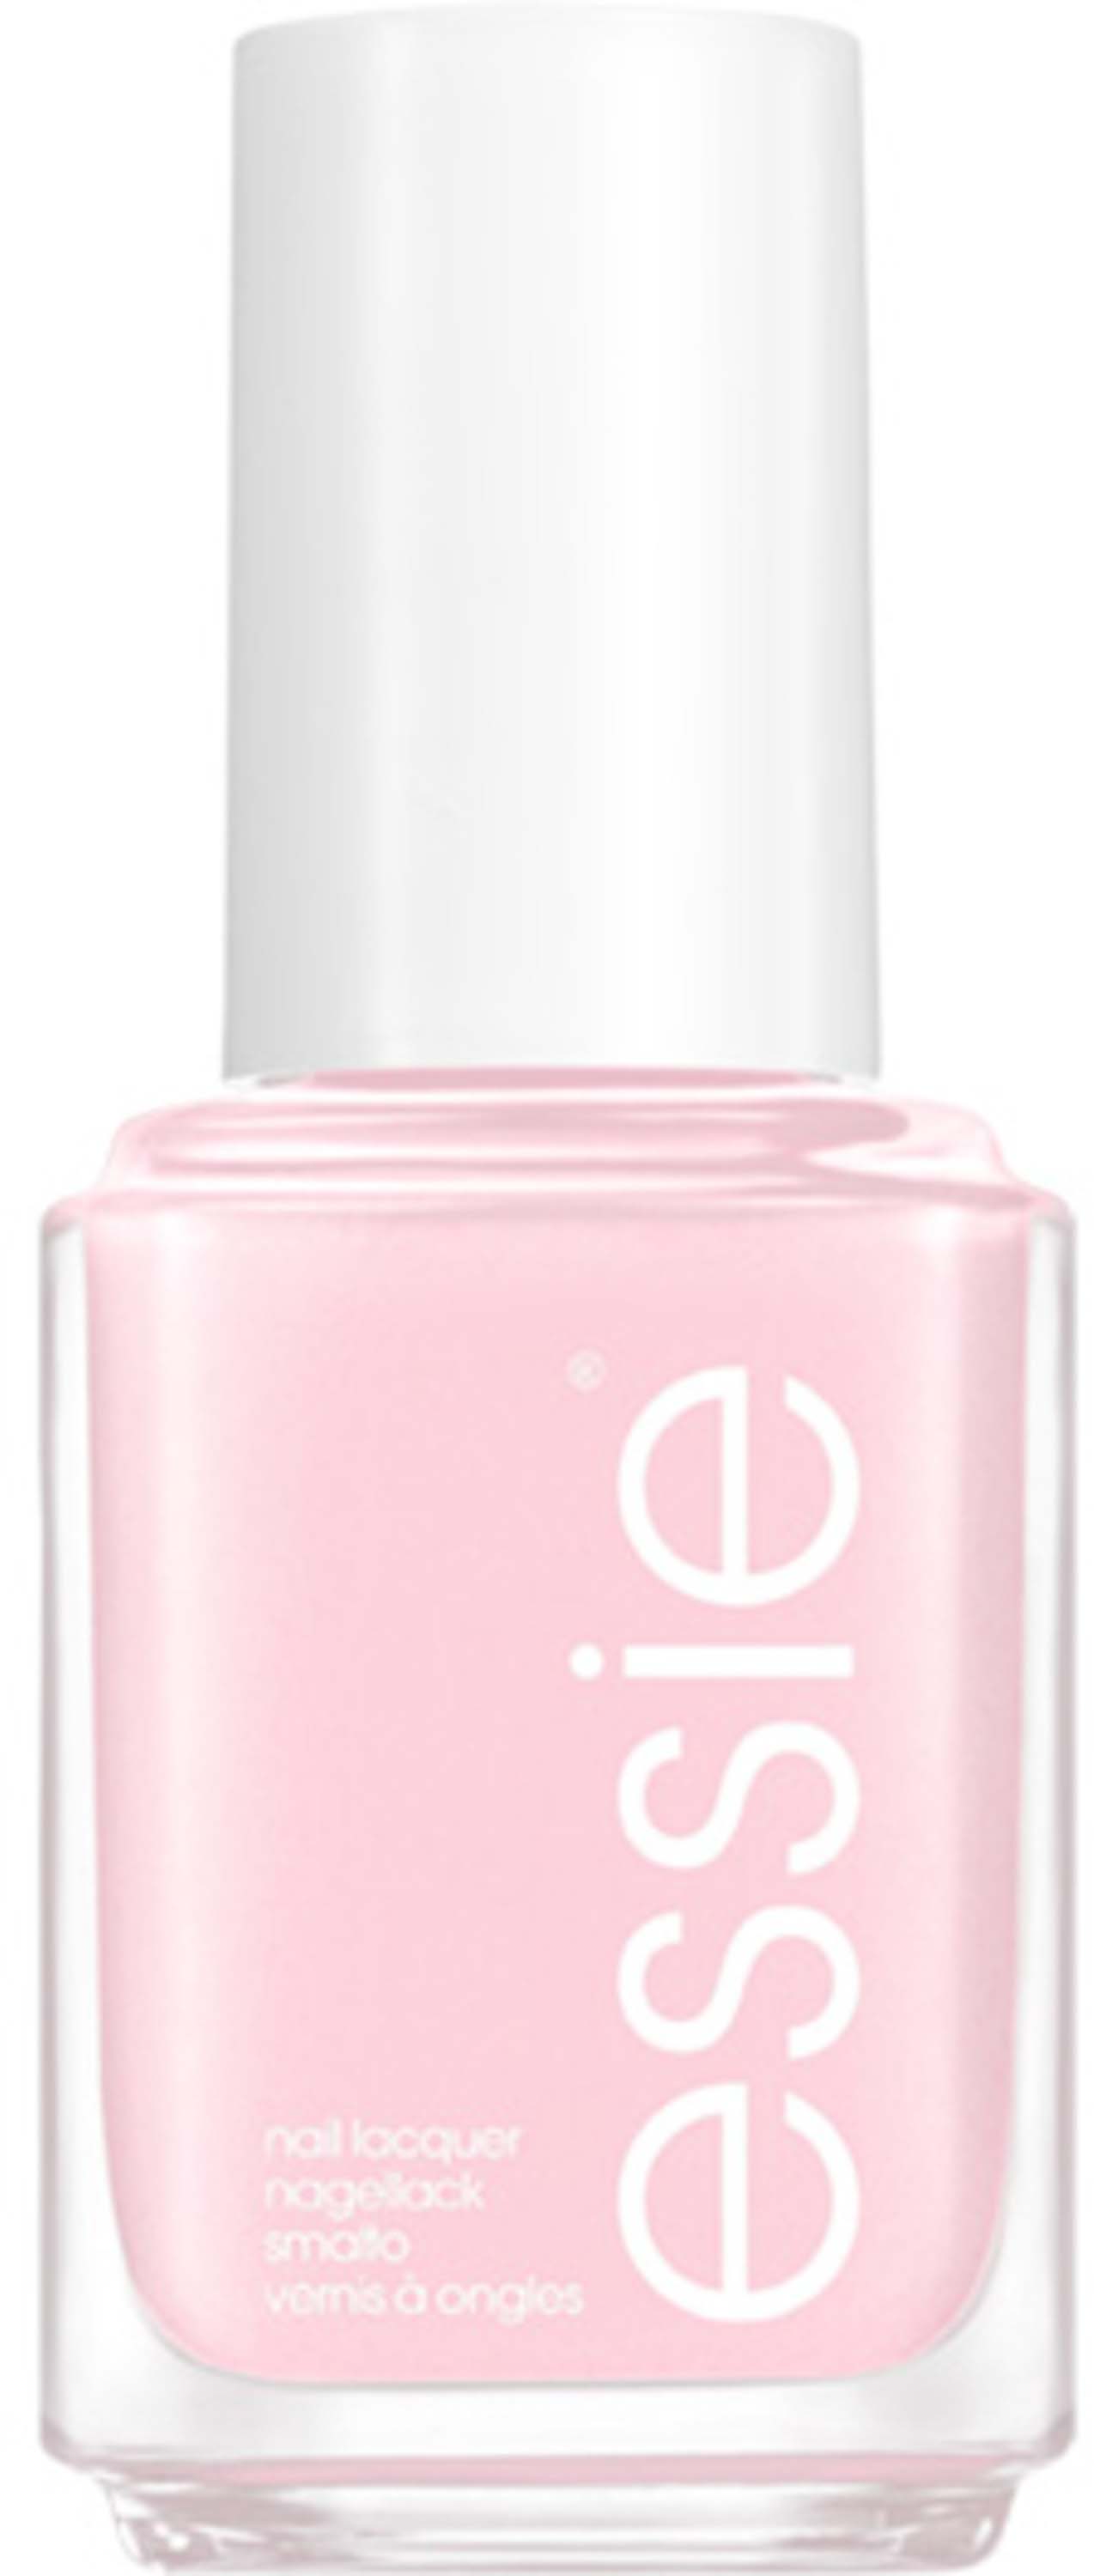 Essie not red-y for bed collection Nail Lacquer 748 Pillow Talk-the-Talk | Nagellacke